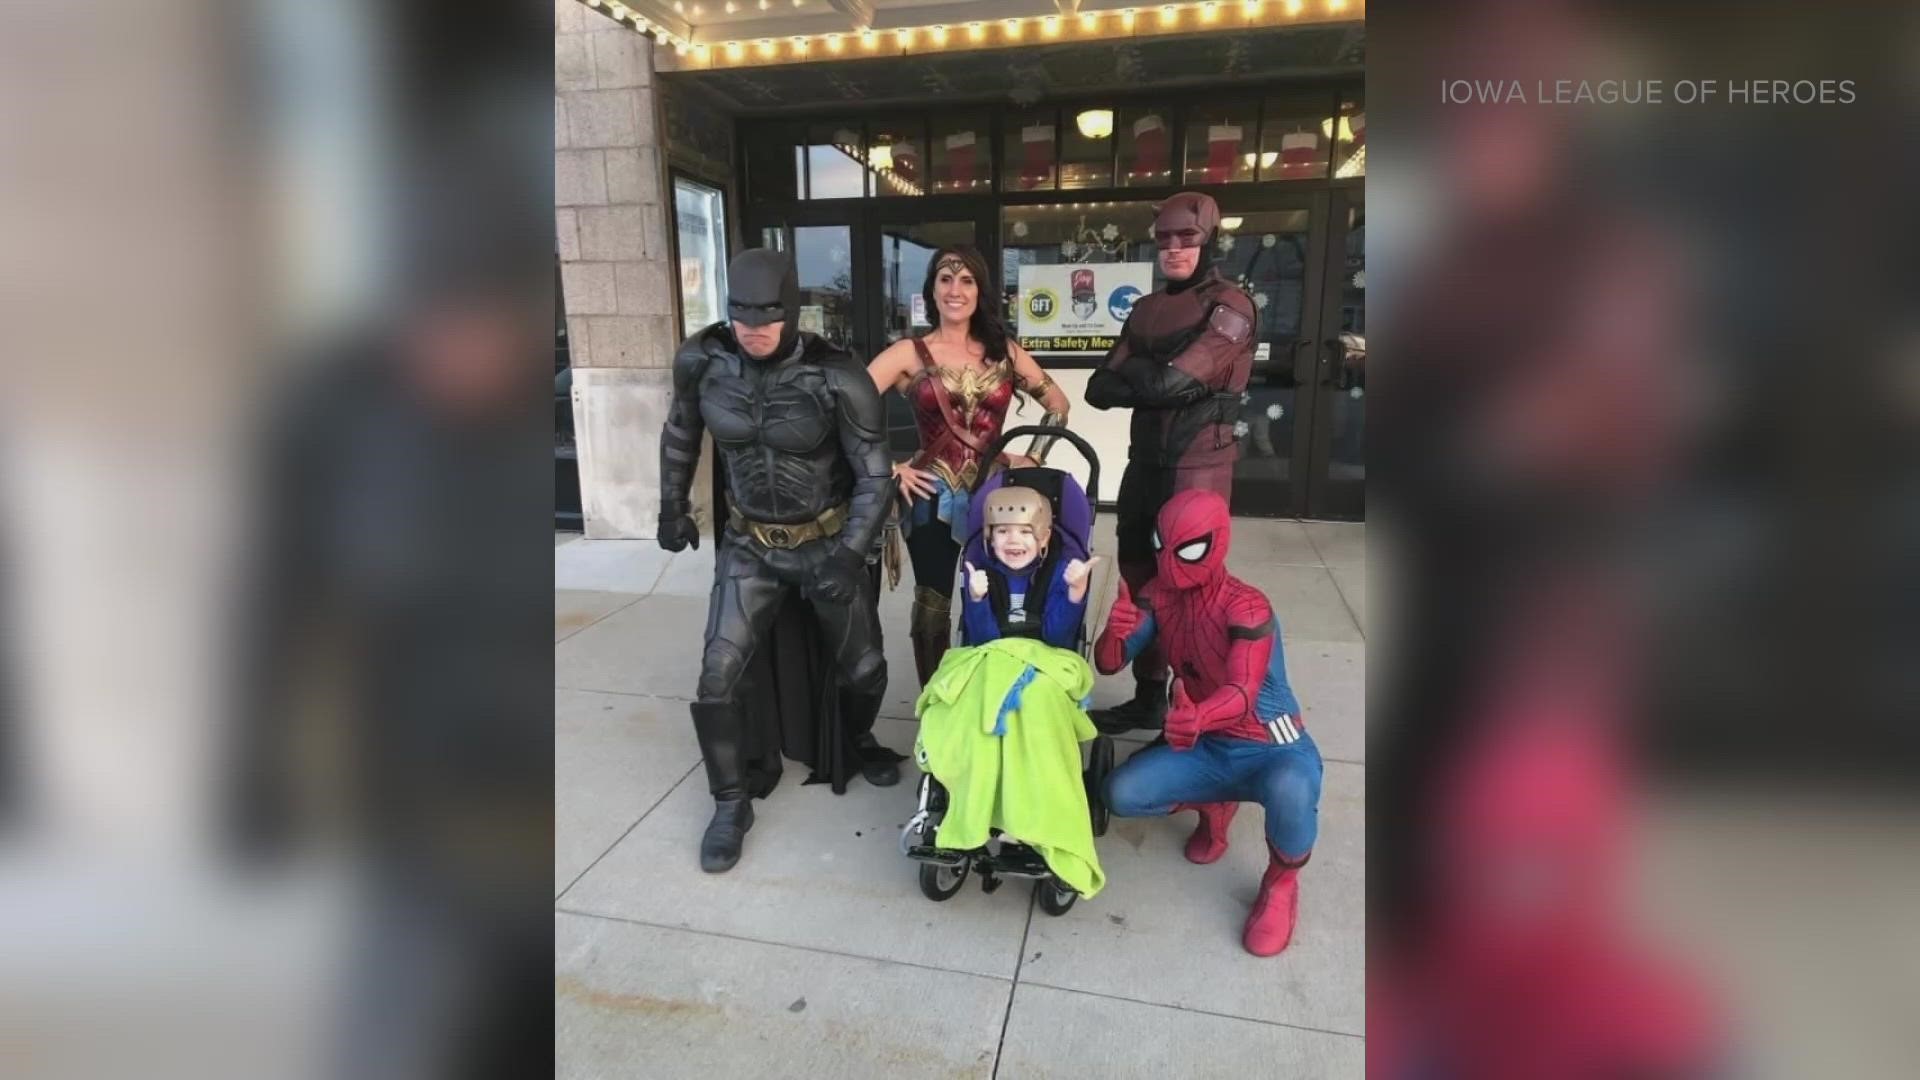 The Iowa League of Heroes brings superheroes right here to Des Moines. For more information, visit https://iowaleagueofheroes.com/